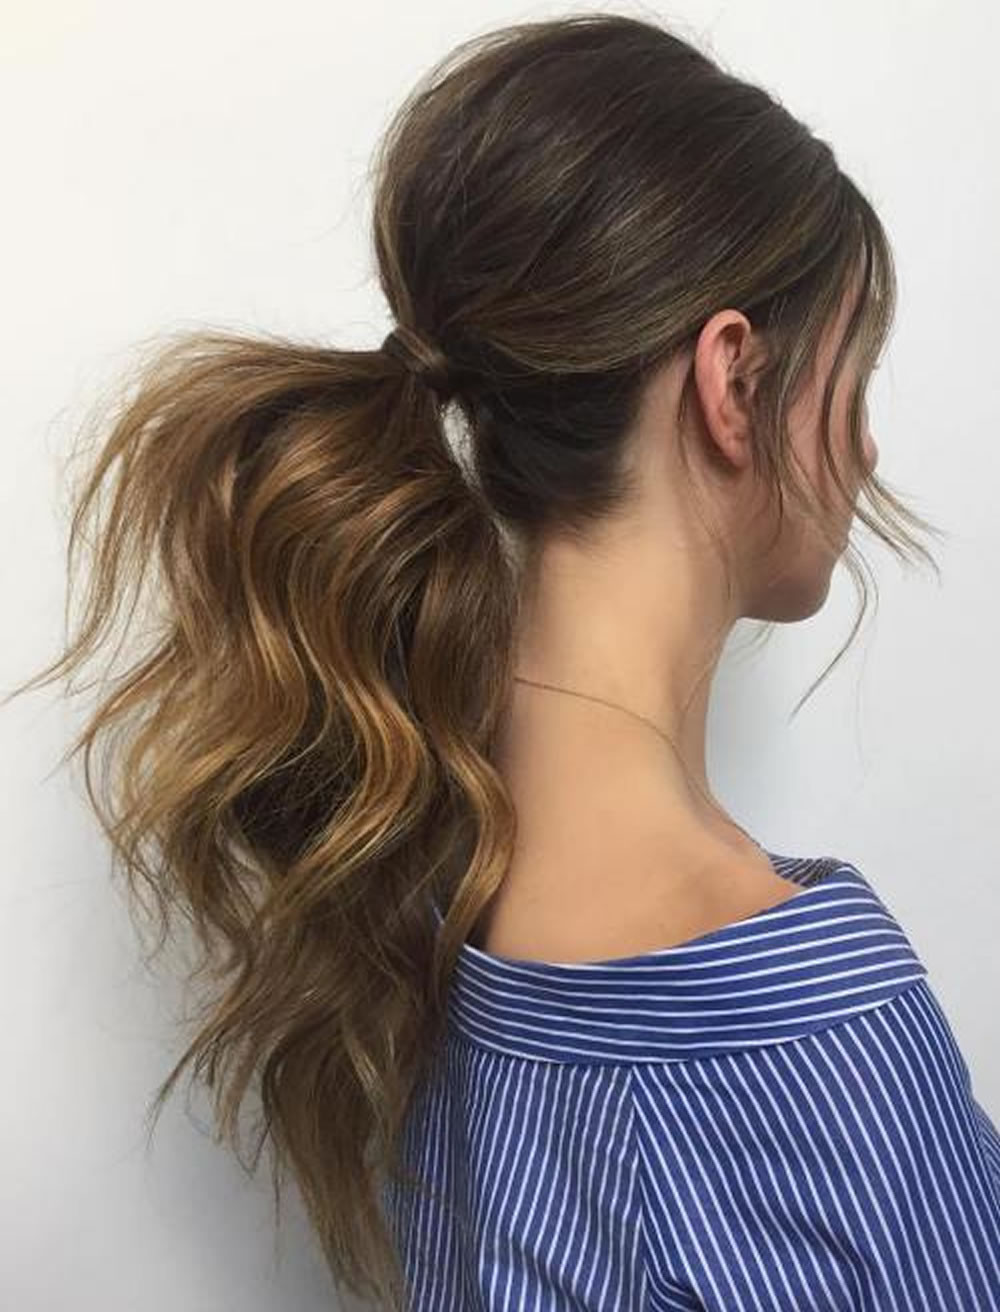 Coolest Haircuts
 The 20 Most Attractive Ponytail Hairstyles for Women